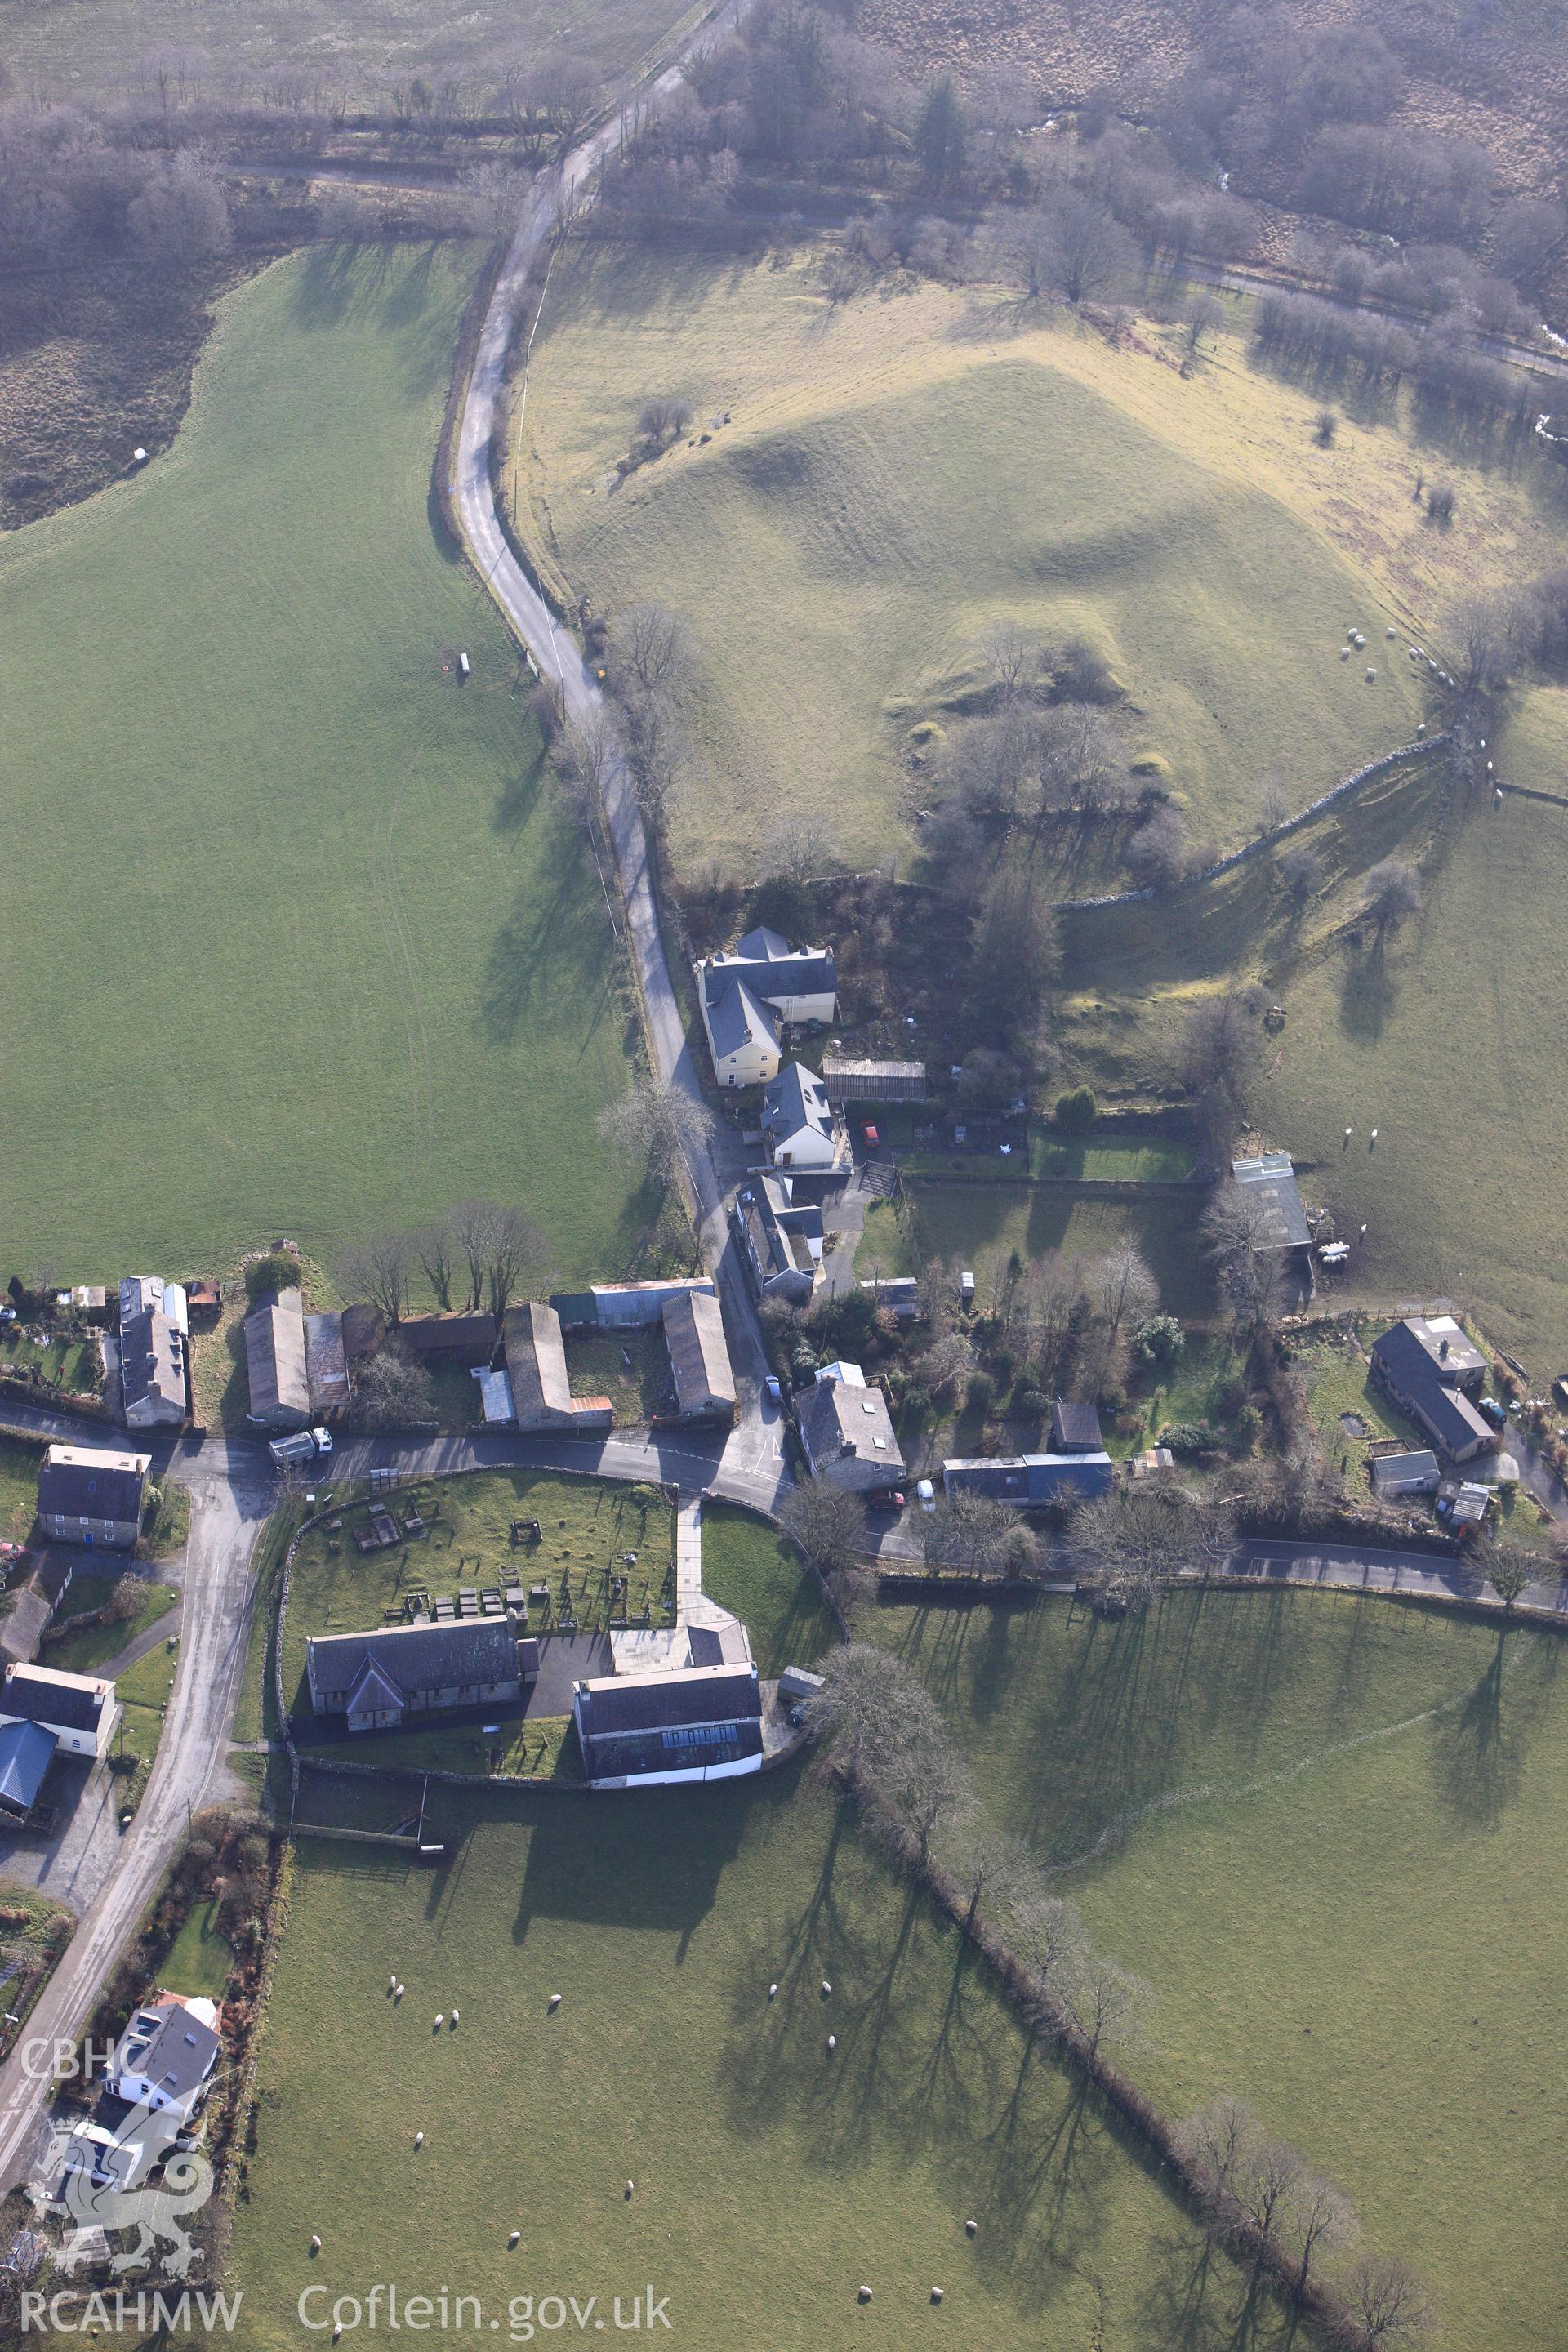 RCAHMW colour oblique photograph of Ystrad Meurig Village. Taken by Toby Driver on 07/02/2012.